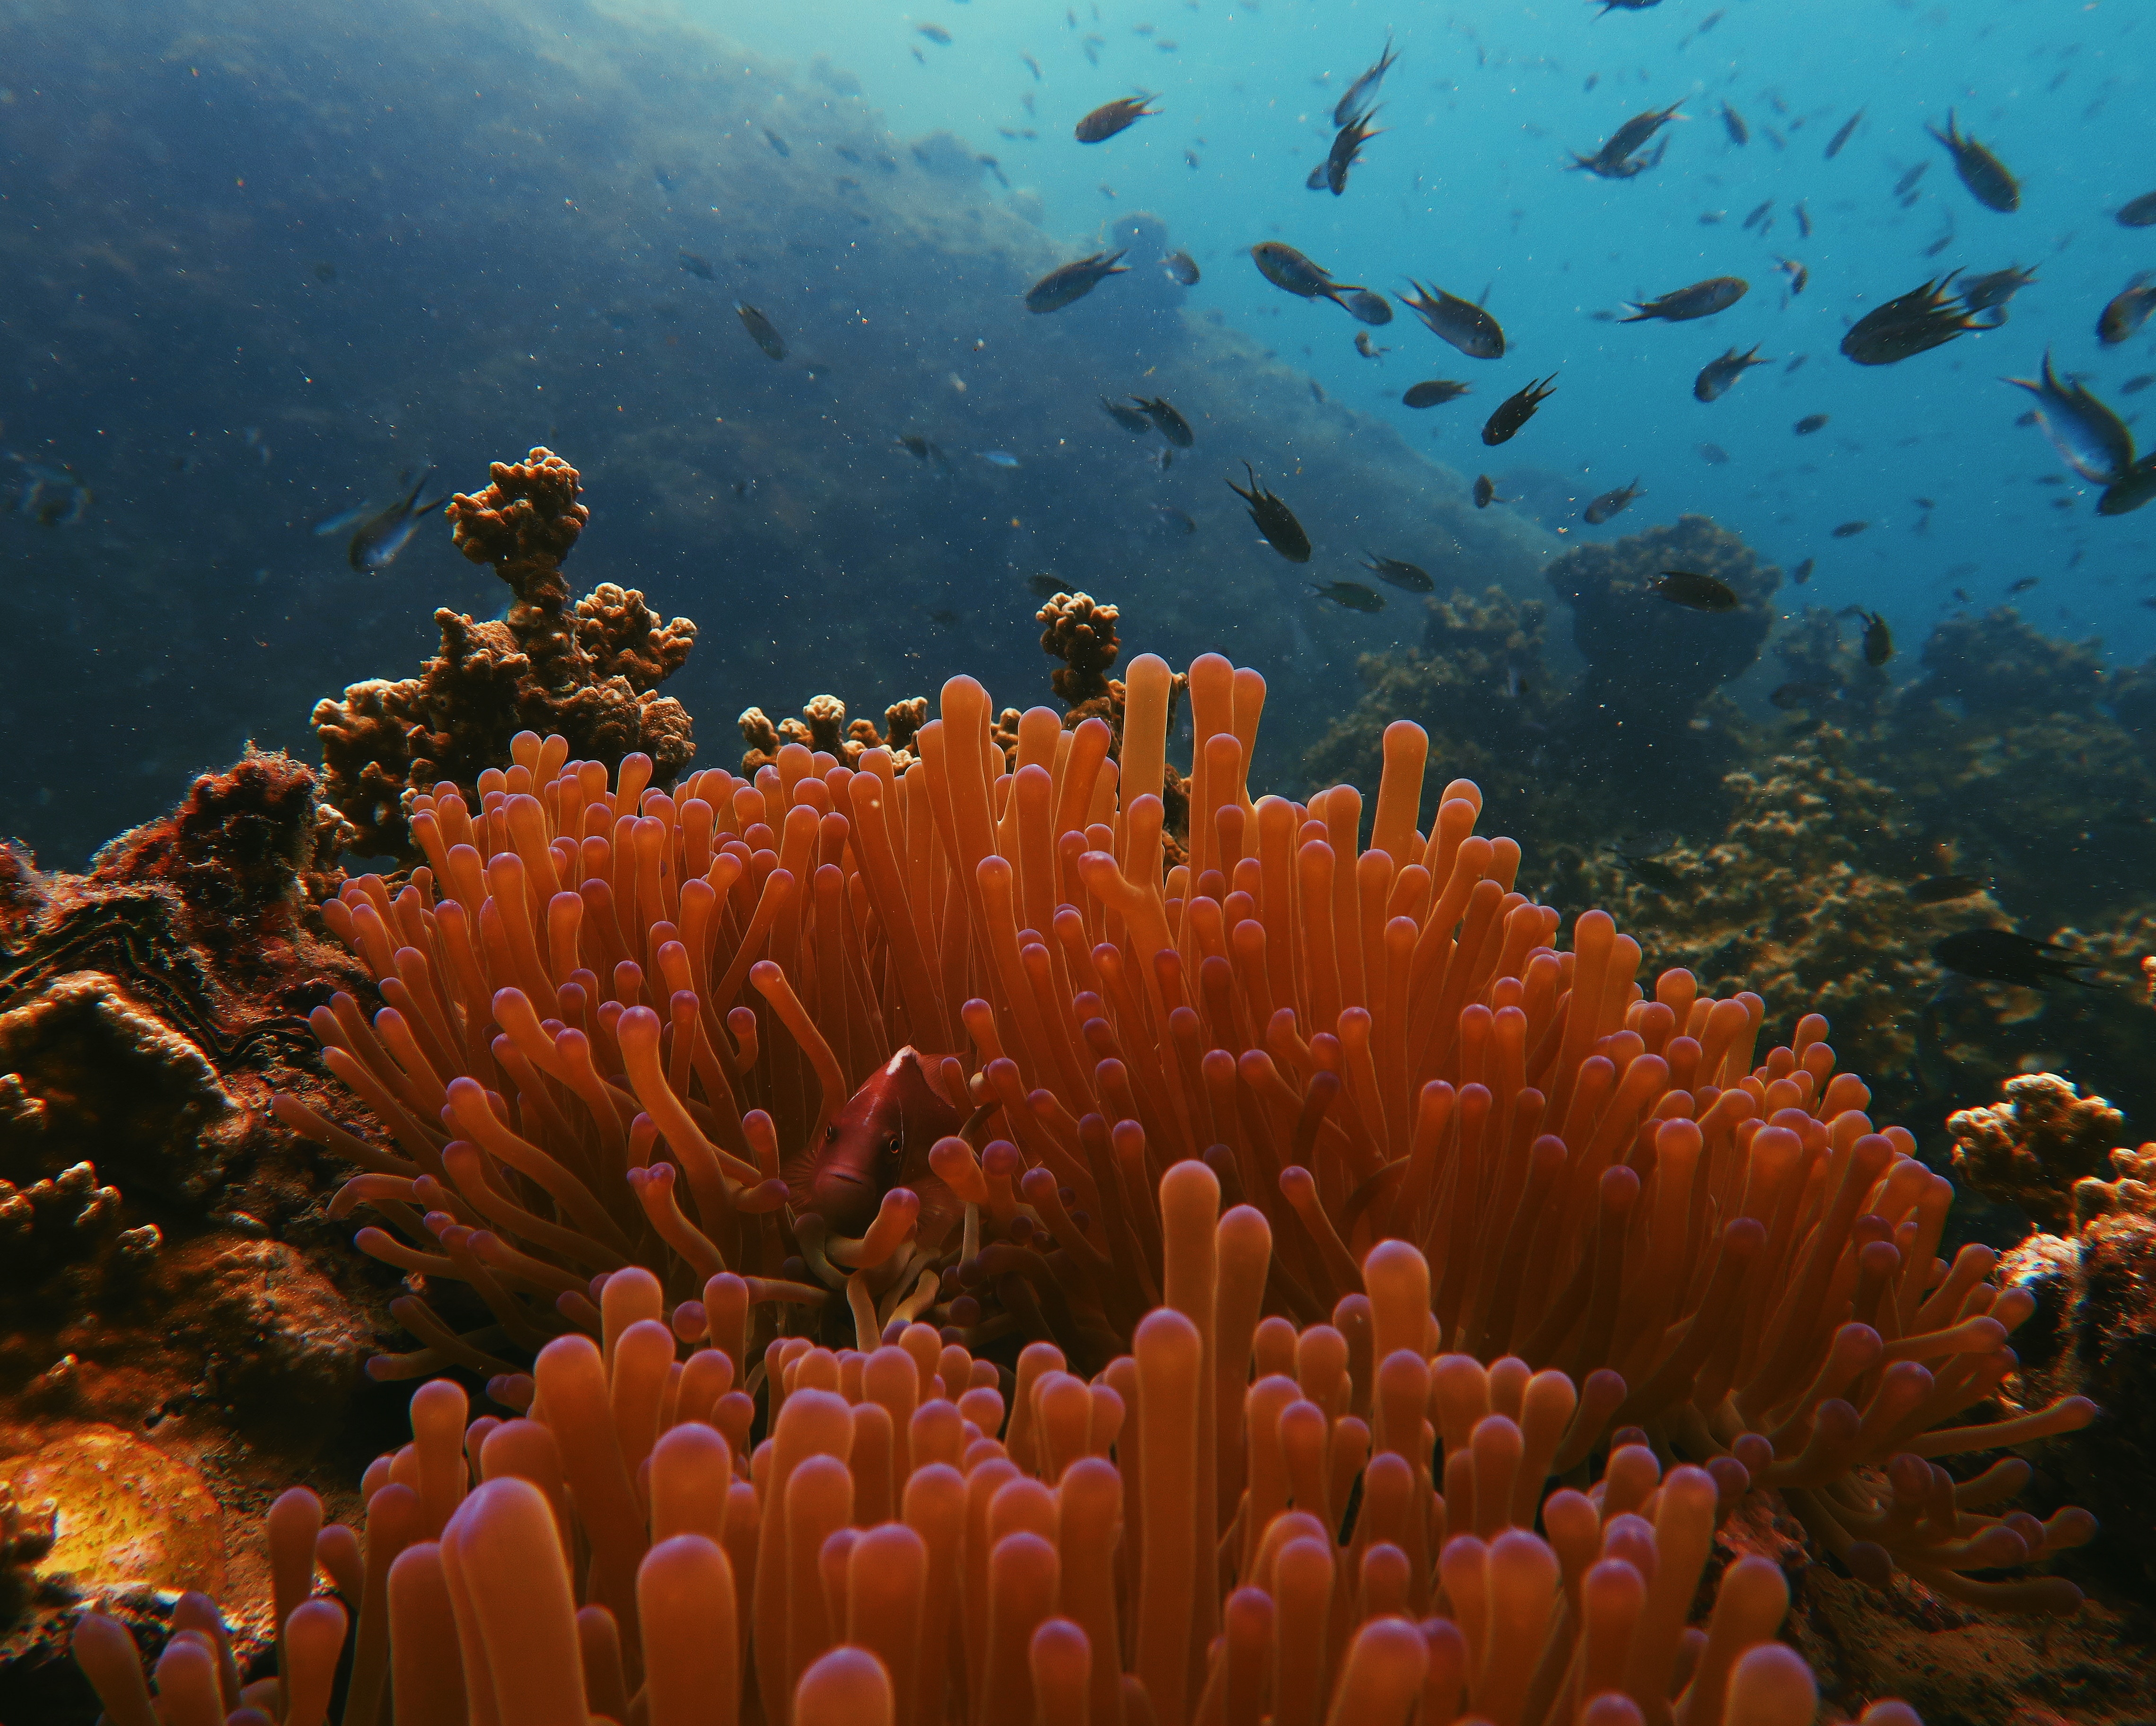 Could a ban on non-biodegradable sunscreen help to save our coral reefs?